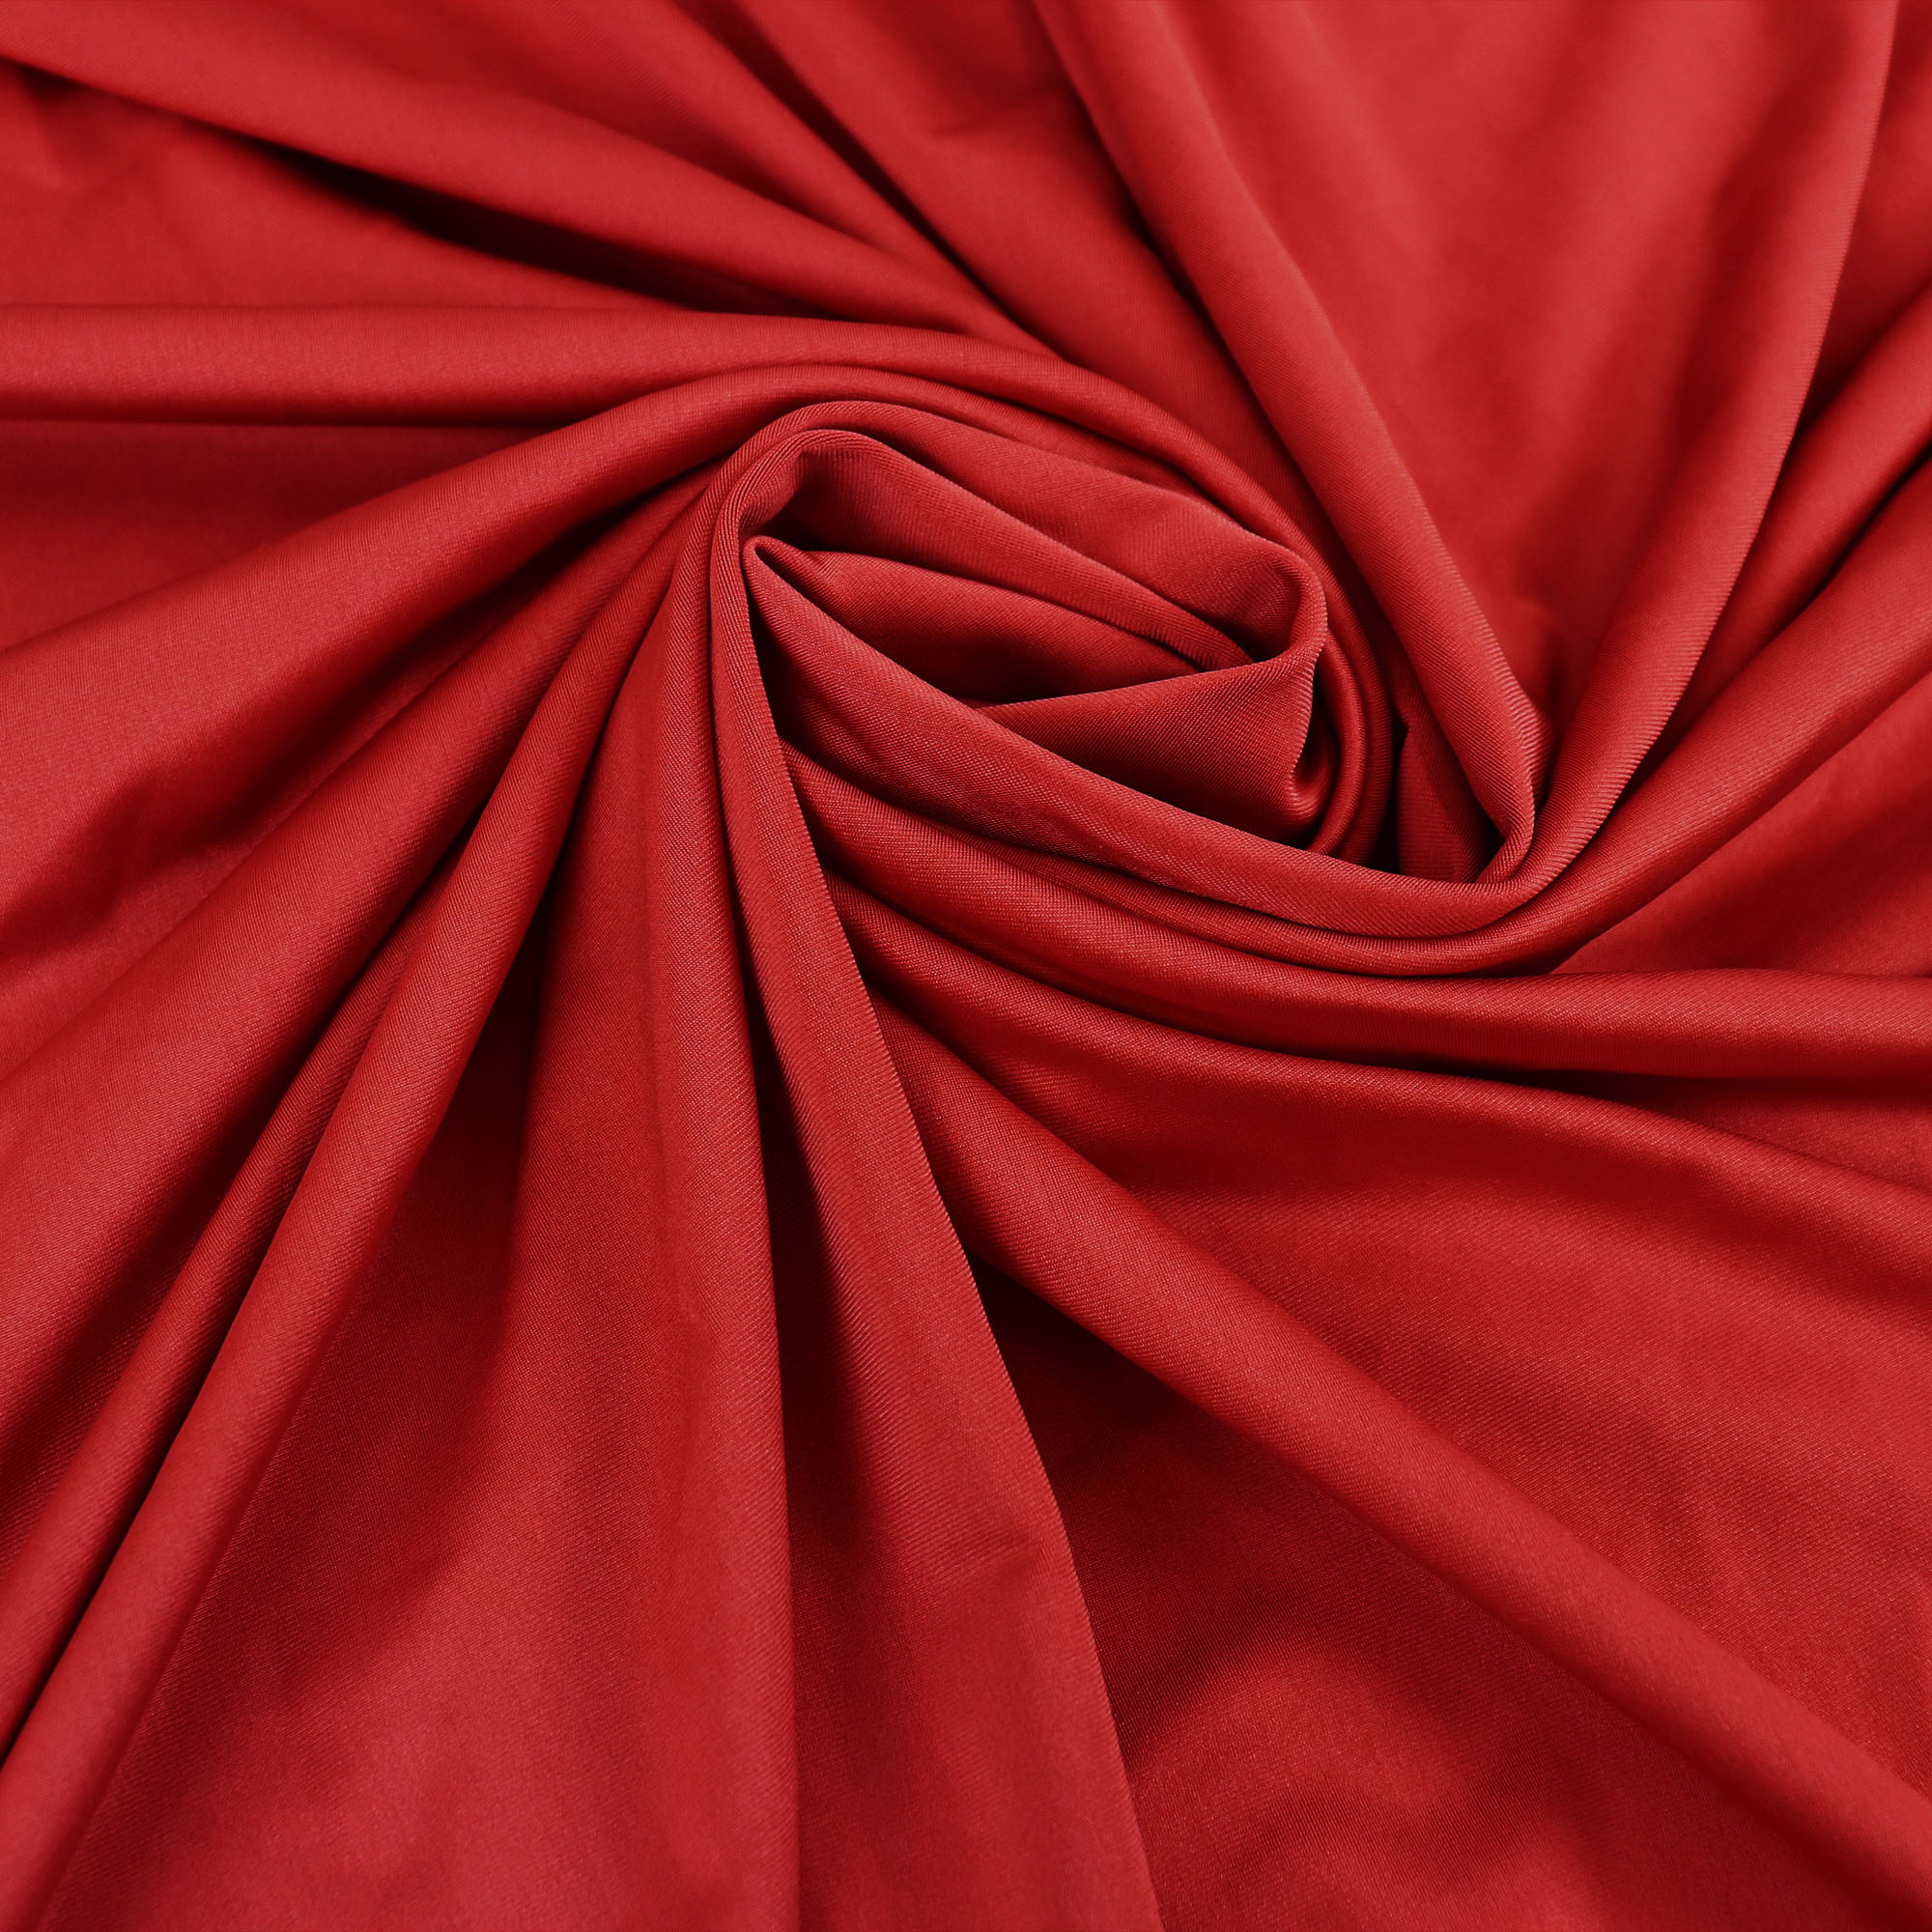 Romex Textiles Polyester Spandex Yoga Knit Fabric (3 Yards) - Red